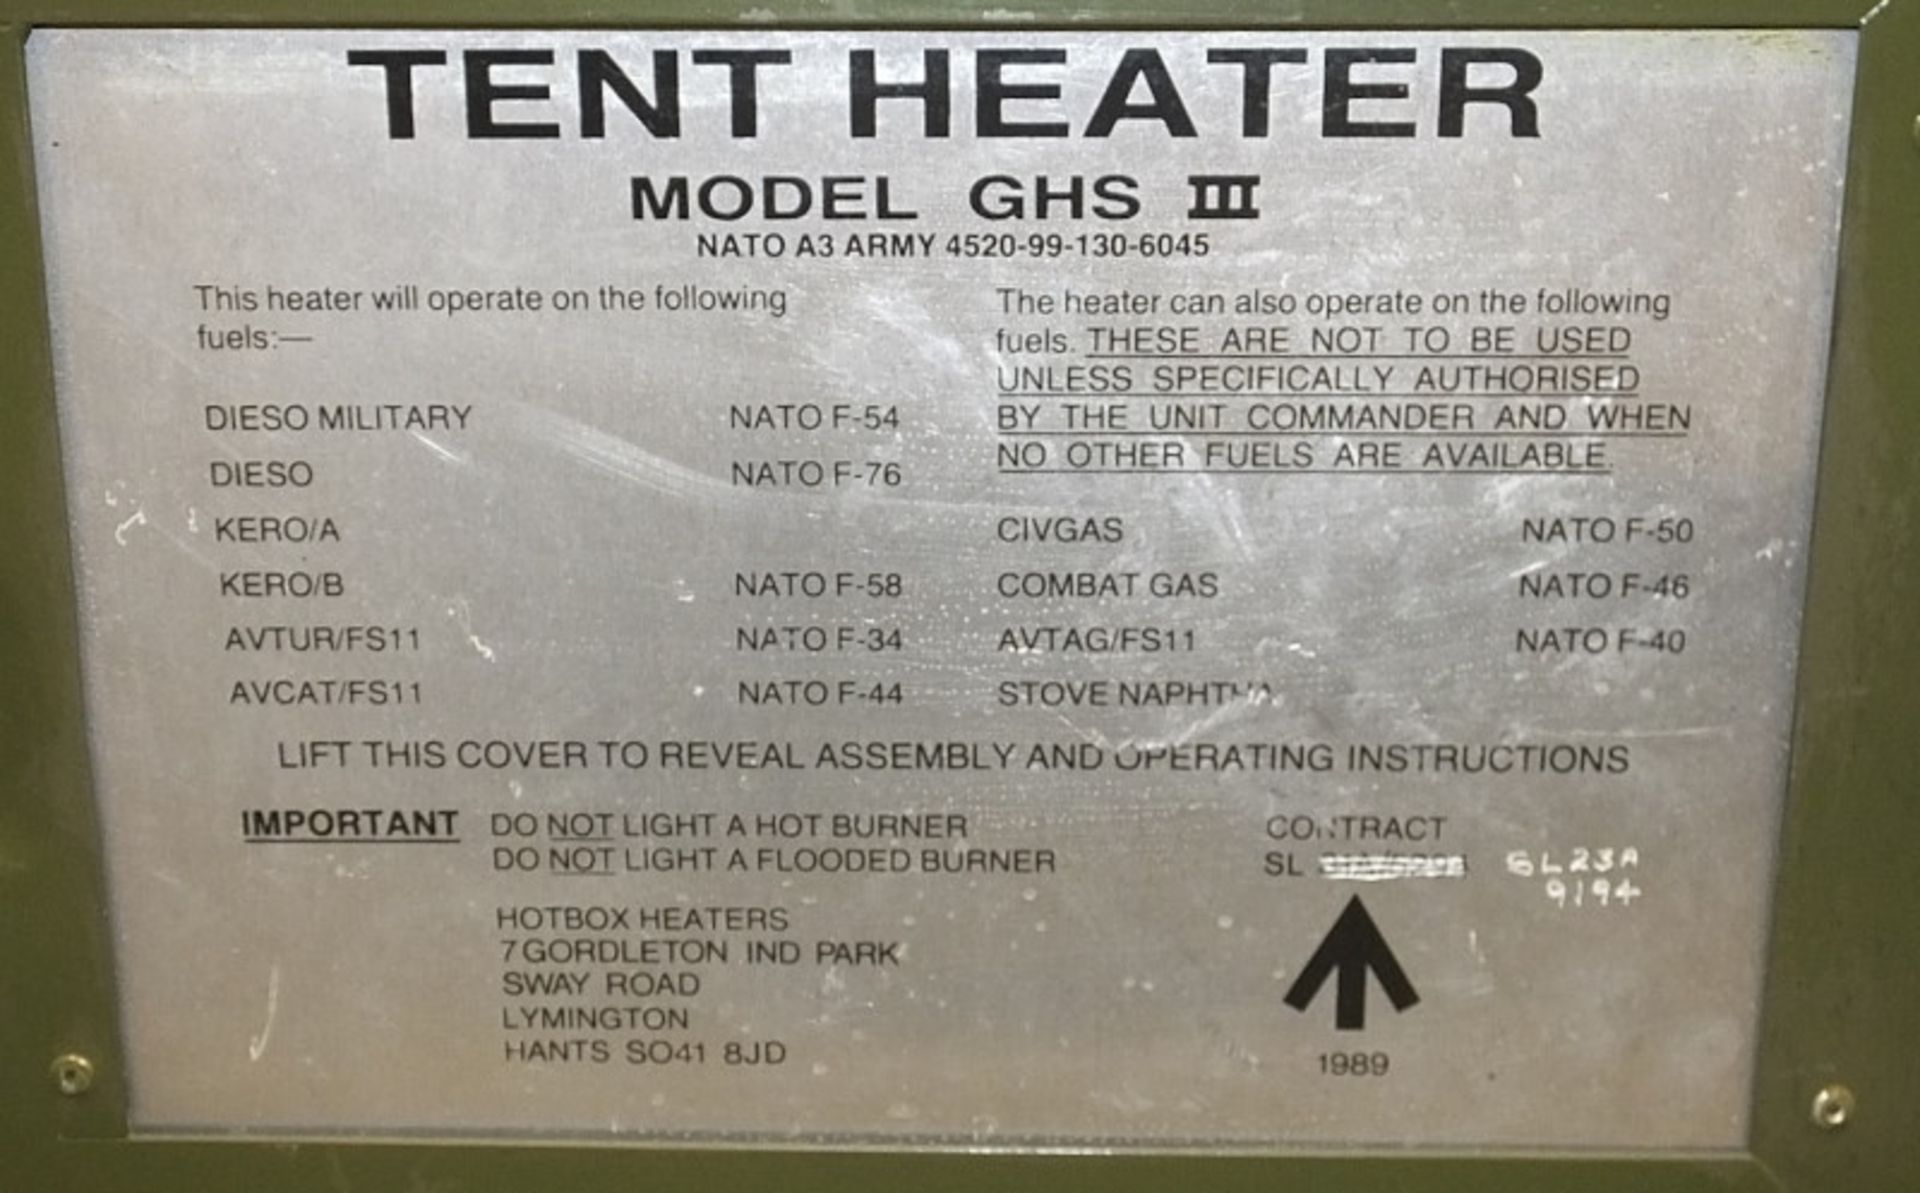 HotBox Heaters Tent Heater GHS III - NSN 4520-99-130-6045 Output - 5-15kW, Ex-MOD specific - Image 8 of 11